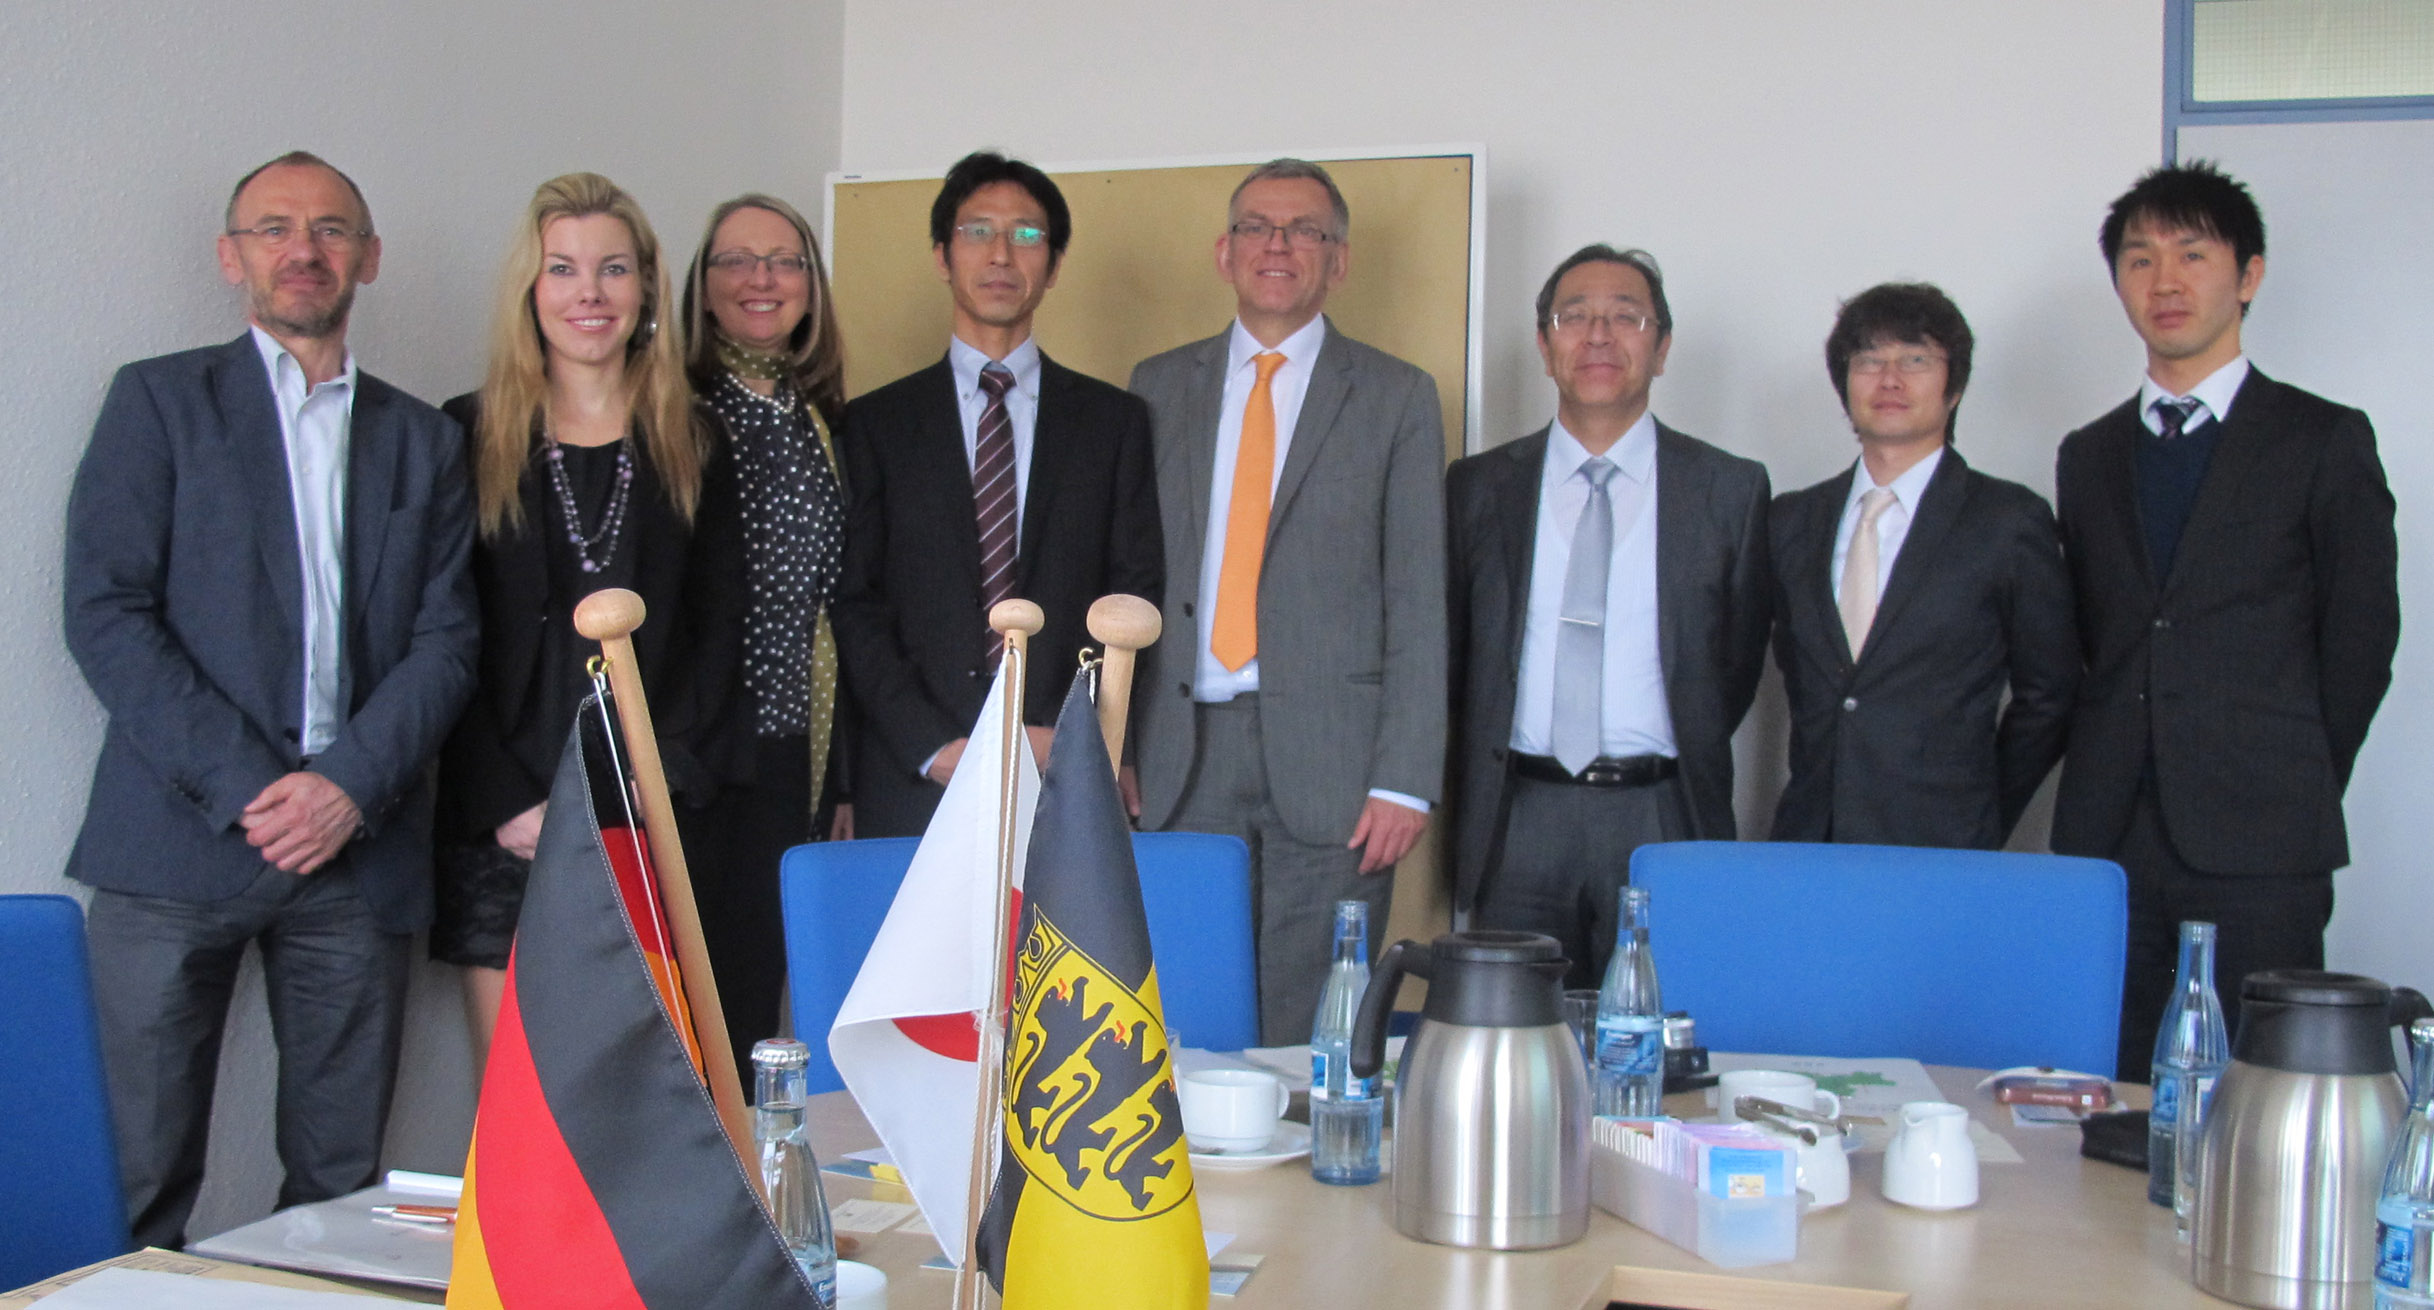 The experts from Gifu on their visit to the Ministry of the Environment (from left to right): Konrad Raab, Dr. Mirja Feldmann and Head of Department Jutta Lück from the Ministry with energy expert Hiroyuki Urasaki (Prefecture of Gifu administration), Dir']